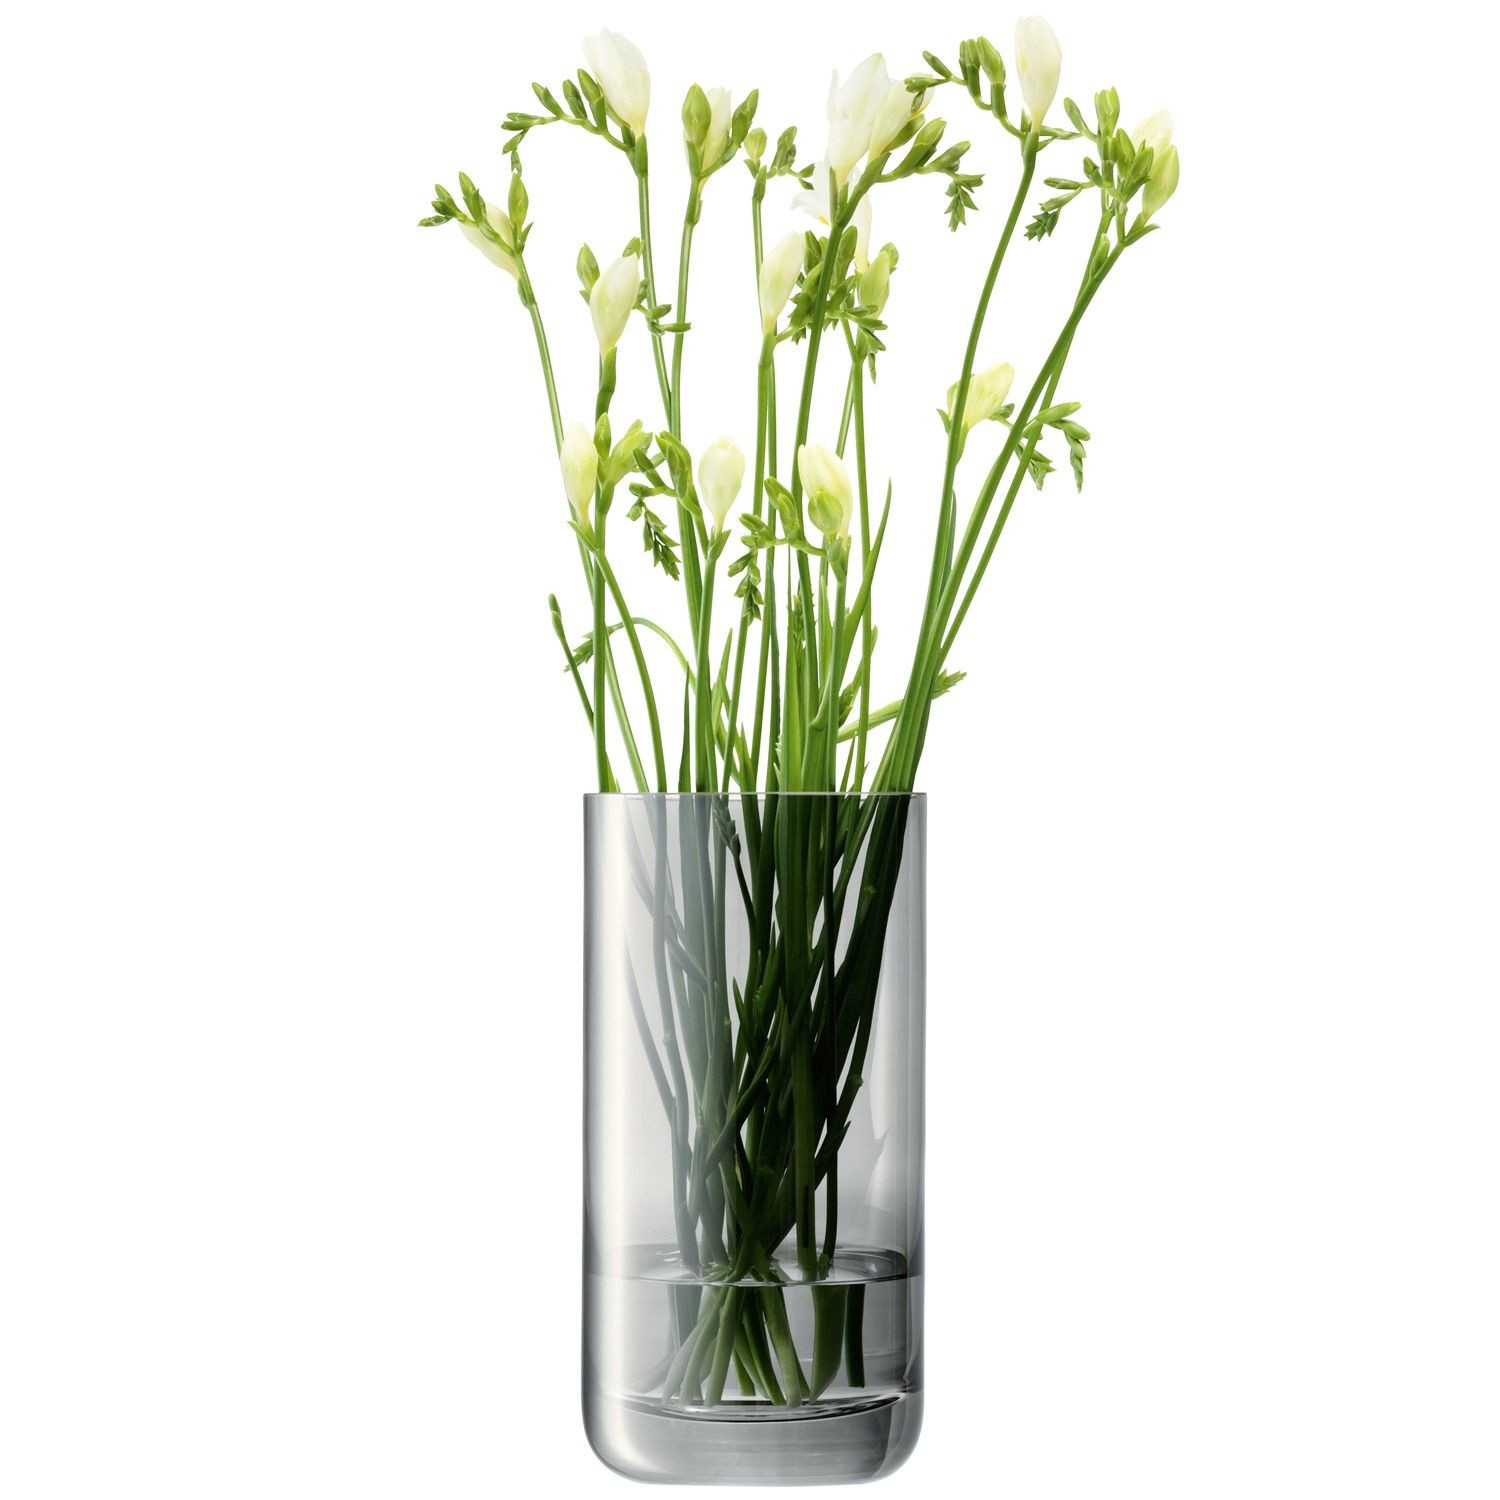 30 Elegant Natural Stone Ikebana Vases 2024 free download natural stone ikebana vases of polka sheer zinc h26cm this mouthblown vase is handpainted in regarding polka sheer zinc h26cm this mouthblown vase is handpainted in popular metallic lustre